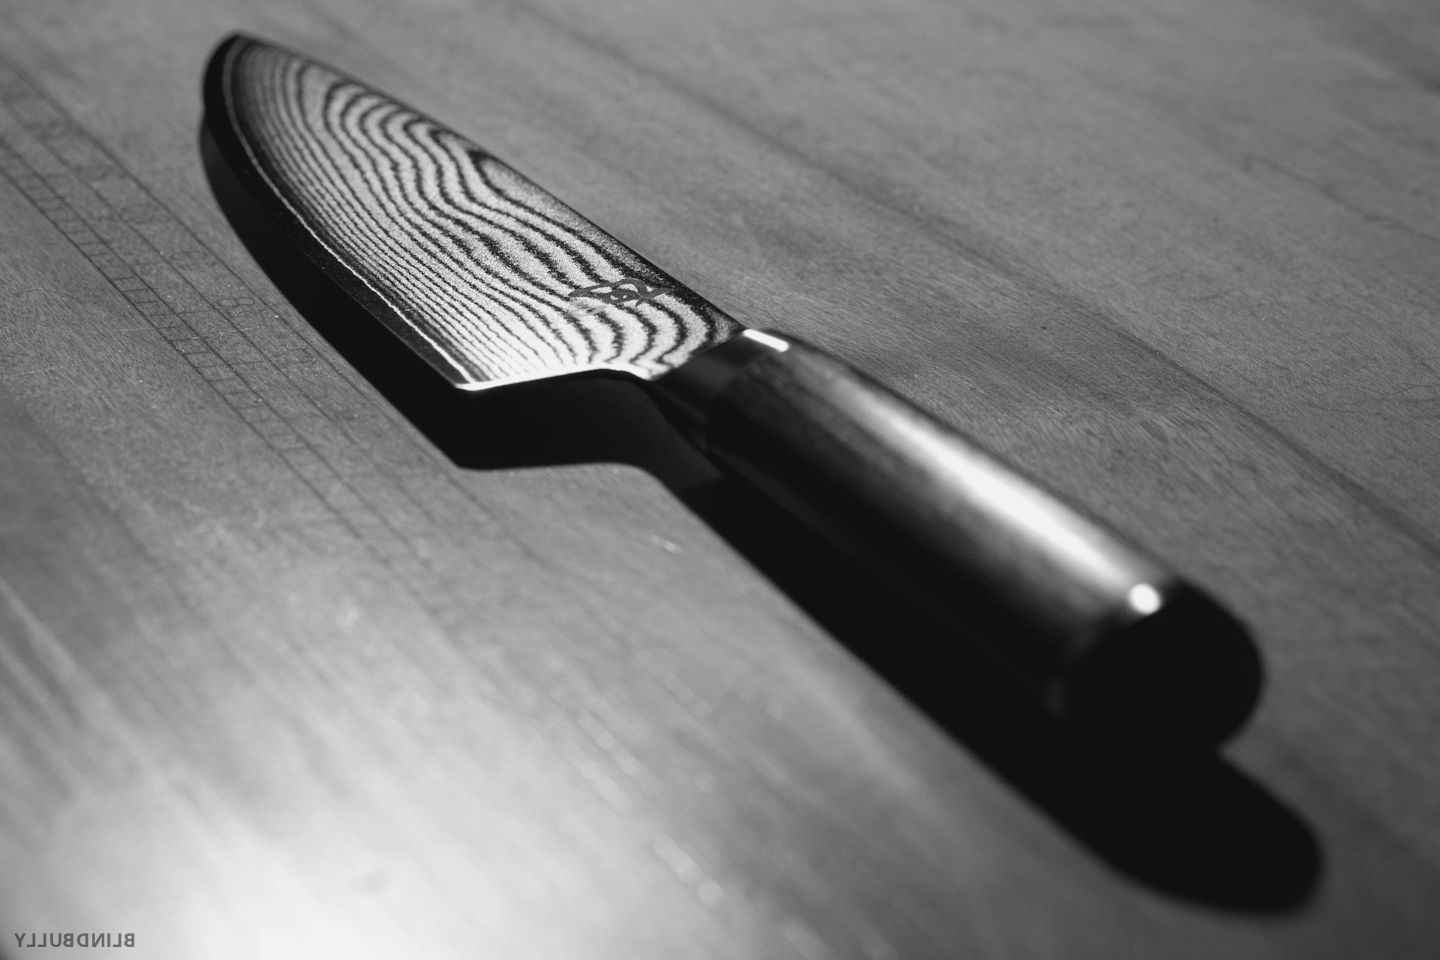 chef wallpaper, wallpaper for chefs hd,. Kitchen knives, Knife